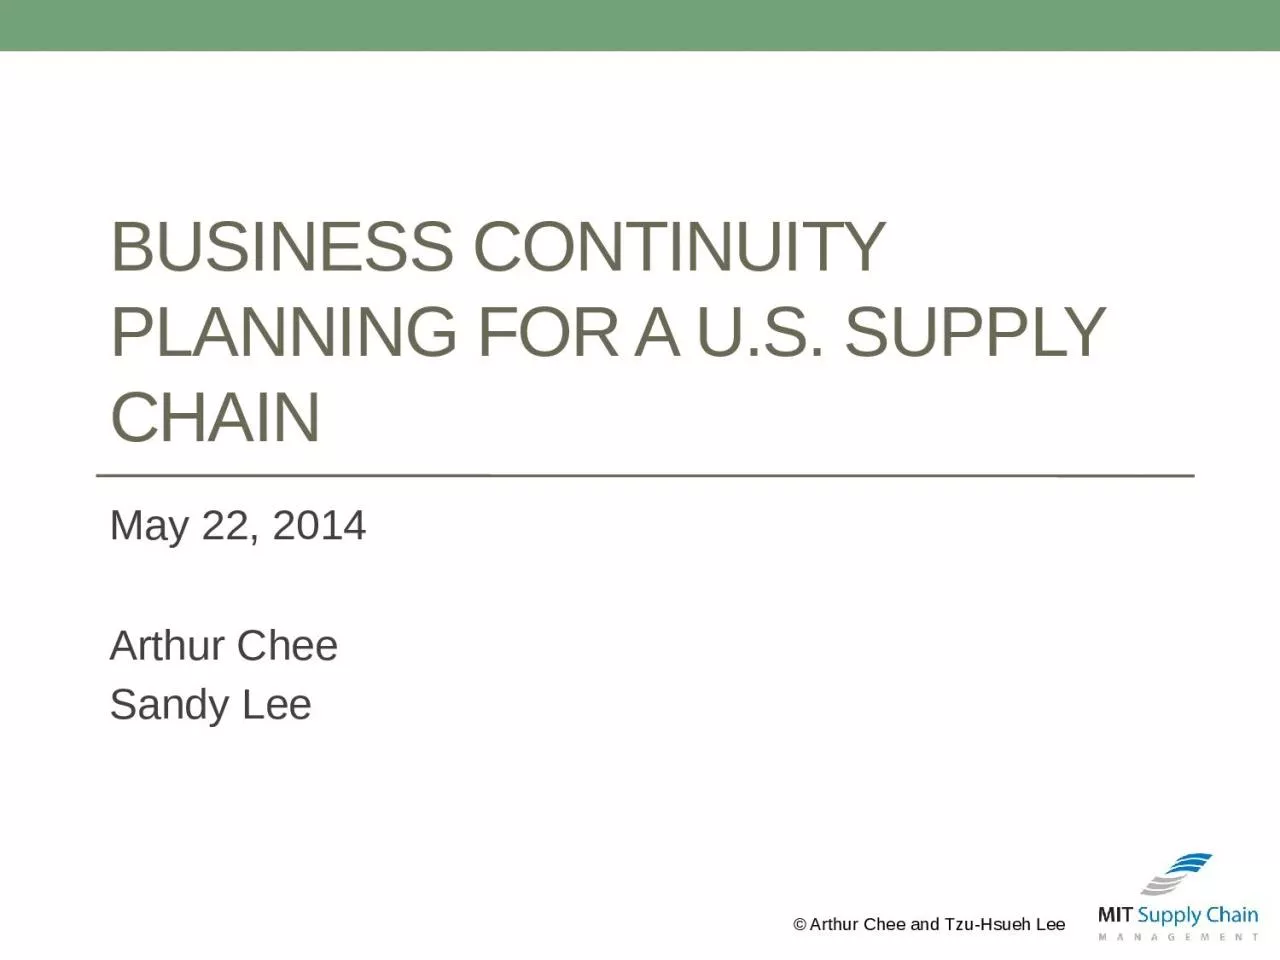 Business Continuity Planning for a U.S. Supply Chain